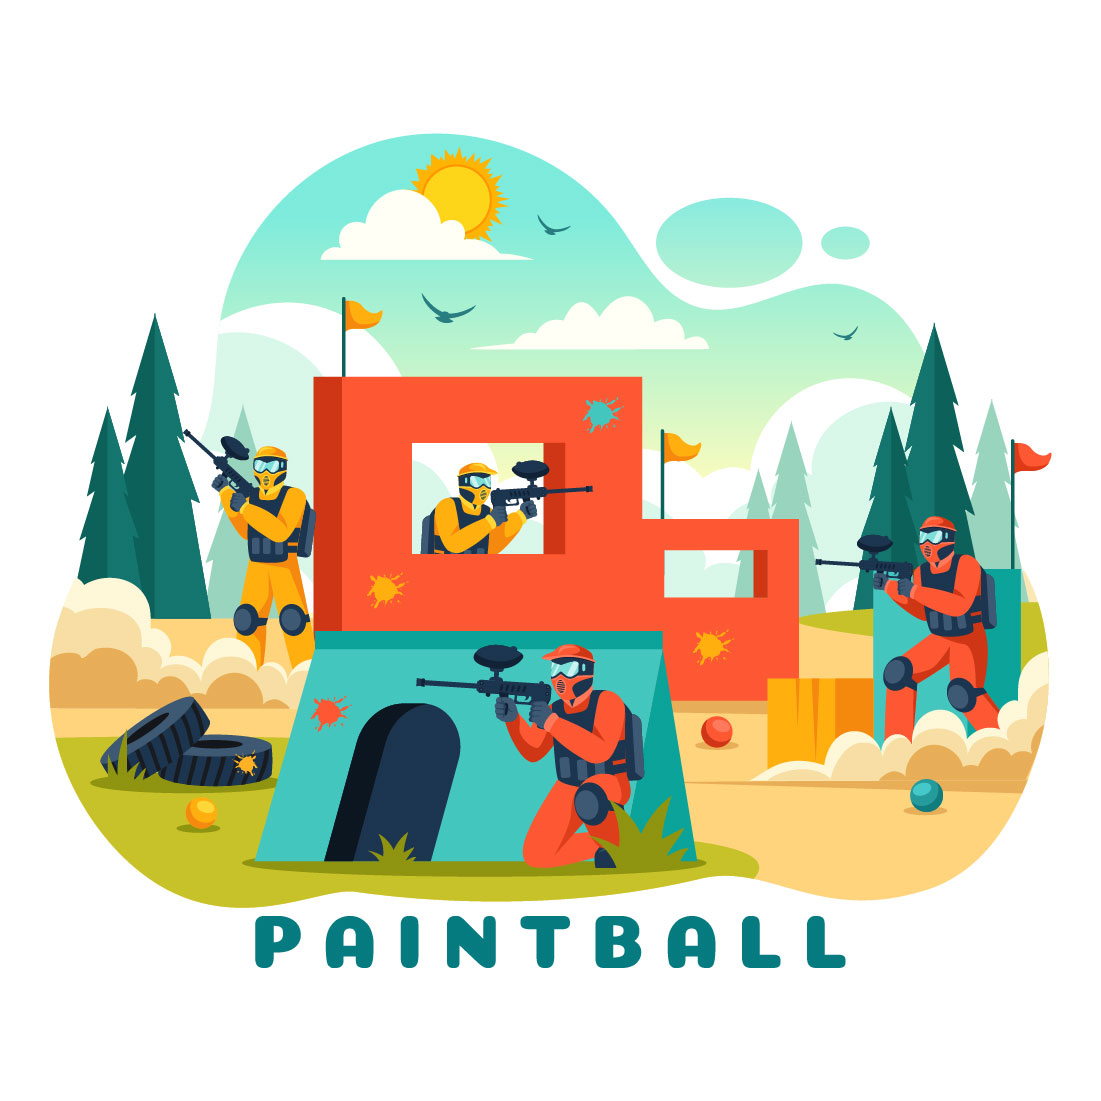 9 Paintball Game Illustration cover image.